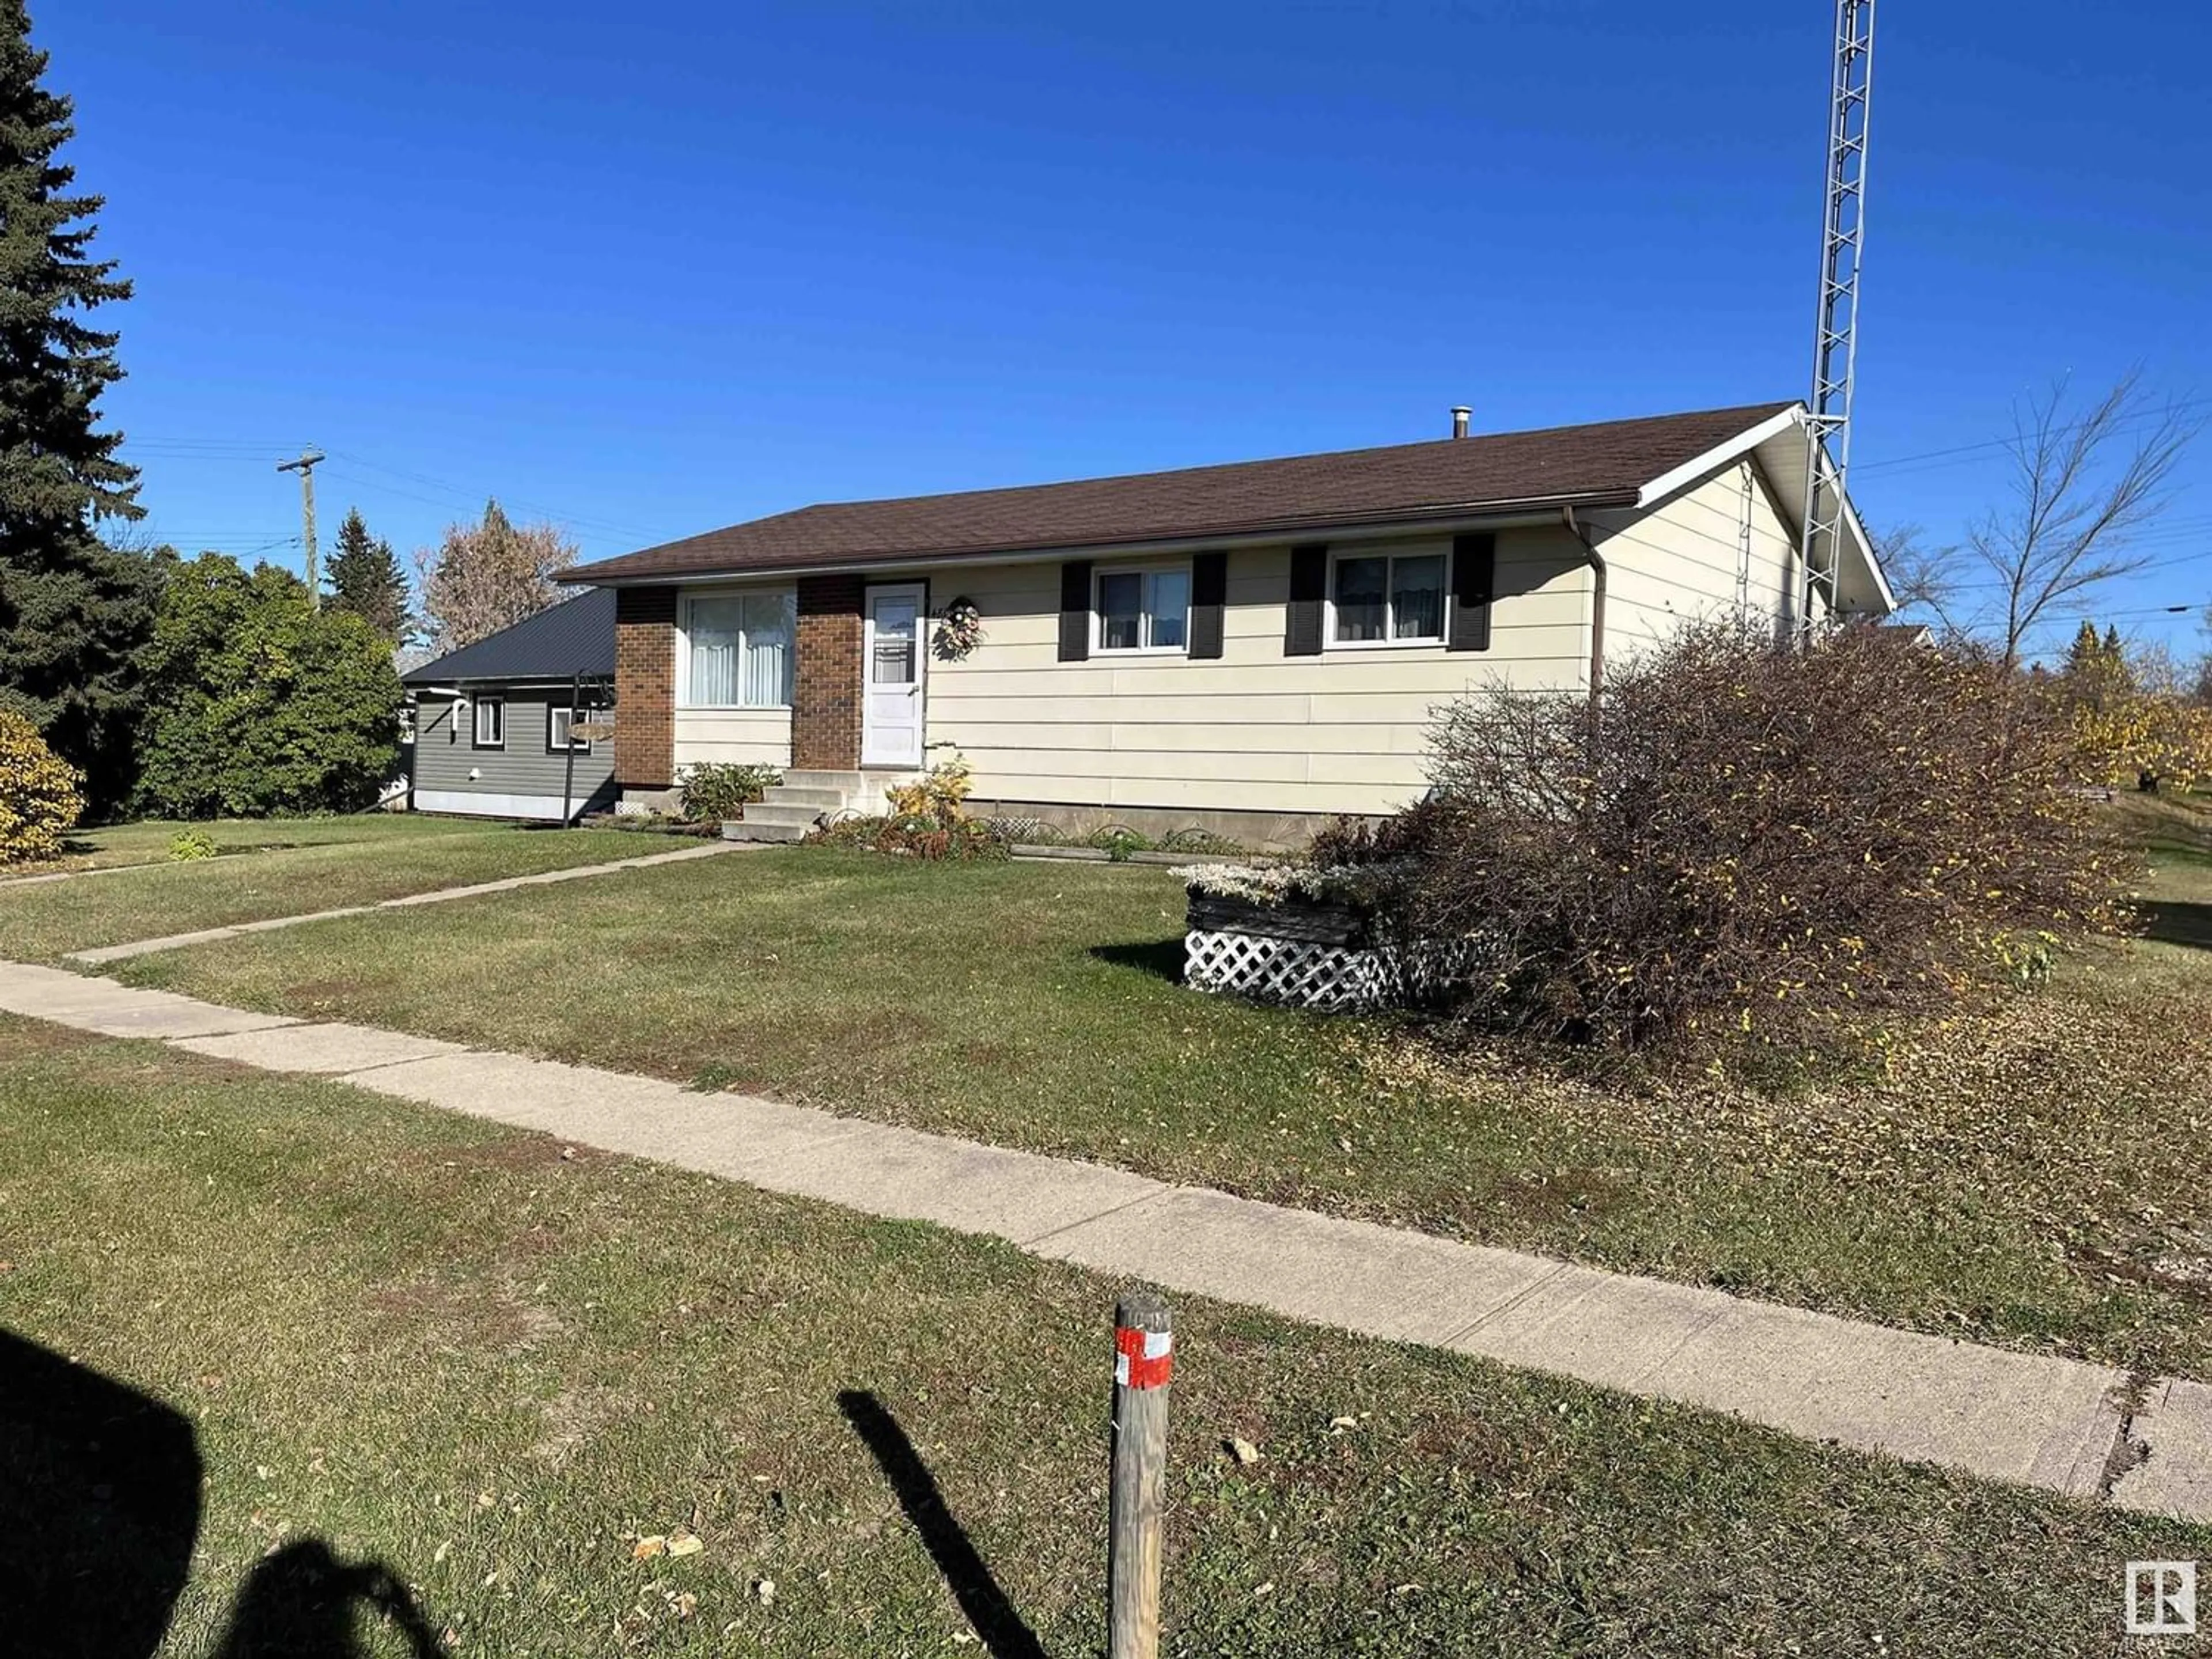 Frontside or backside of a home for 4815 52 St, Glendon Alberta T0A1P0